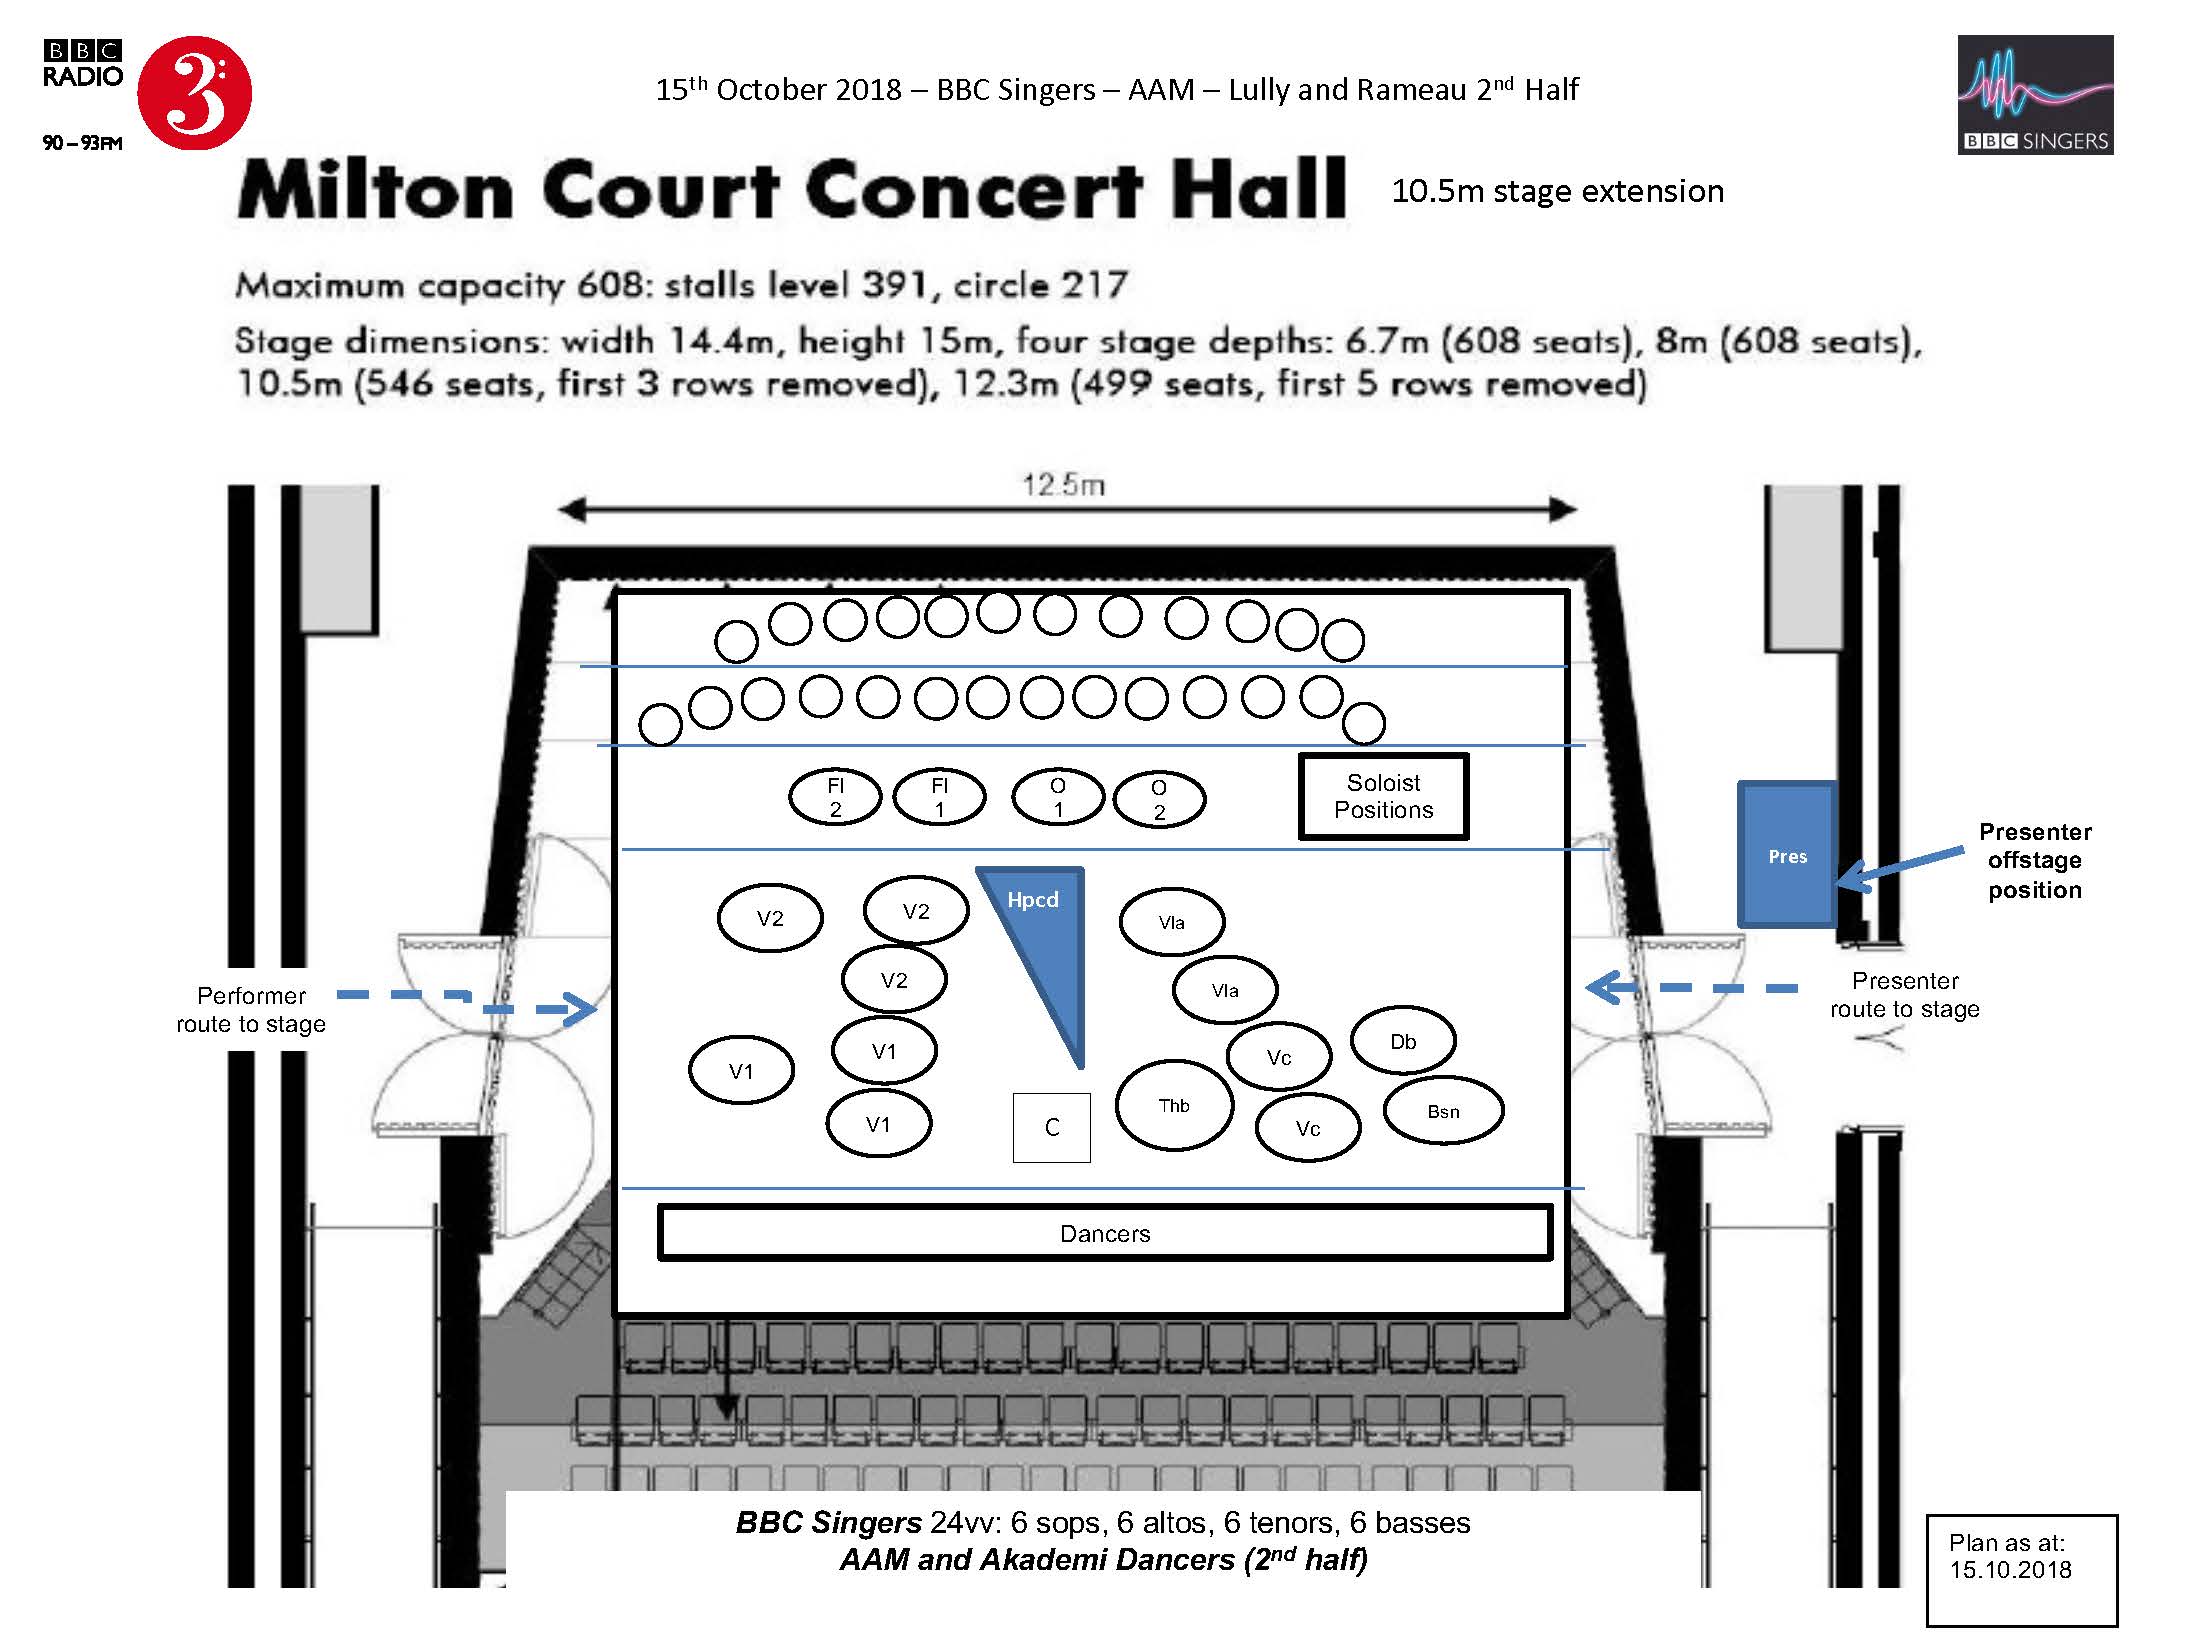 Stage layout for BBC Singers Concert Second Half